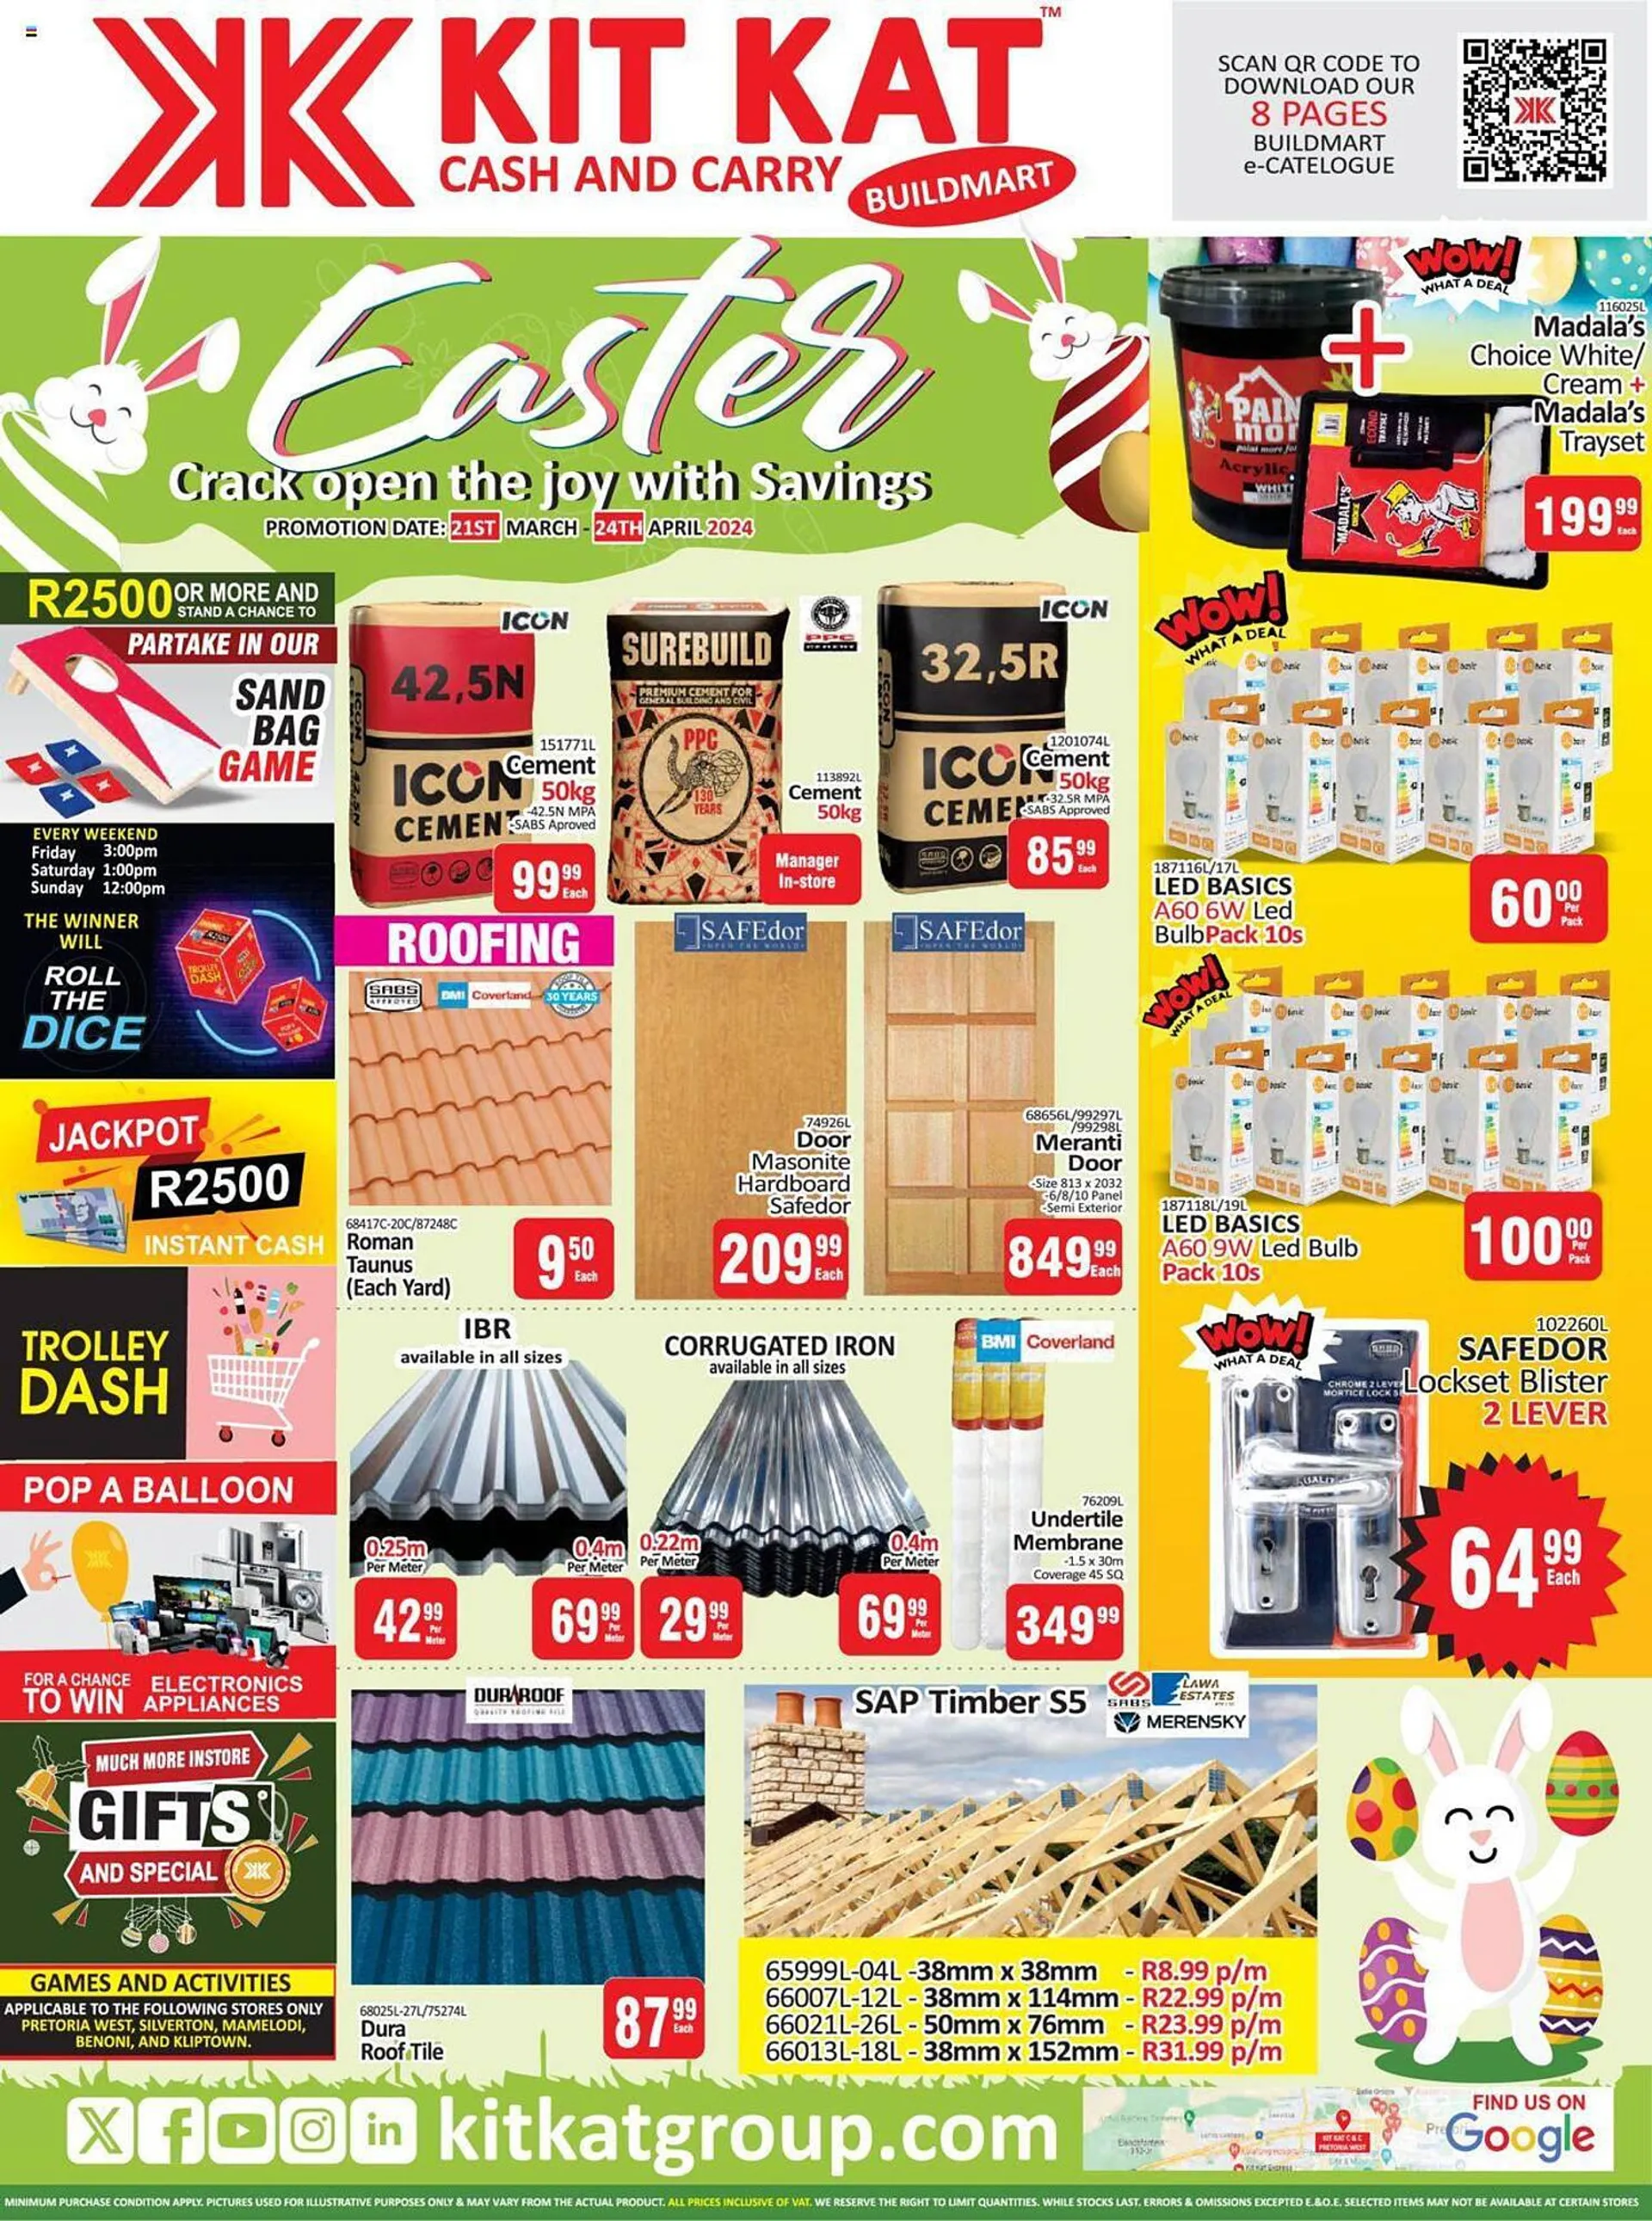 KitKat Cash and Carry catalogue - 21 March 24 April 2024